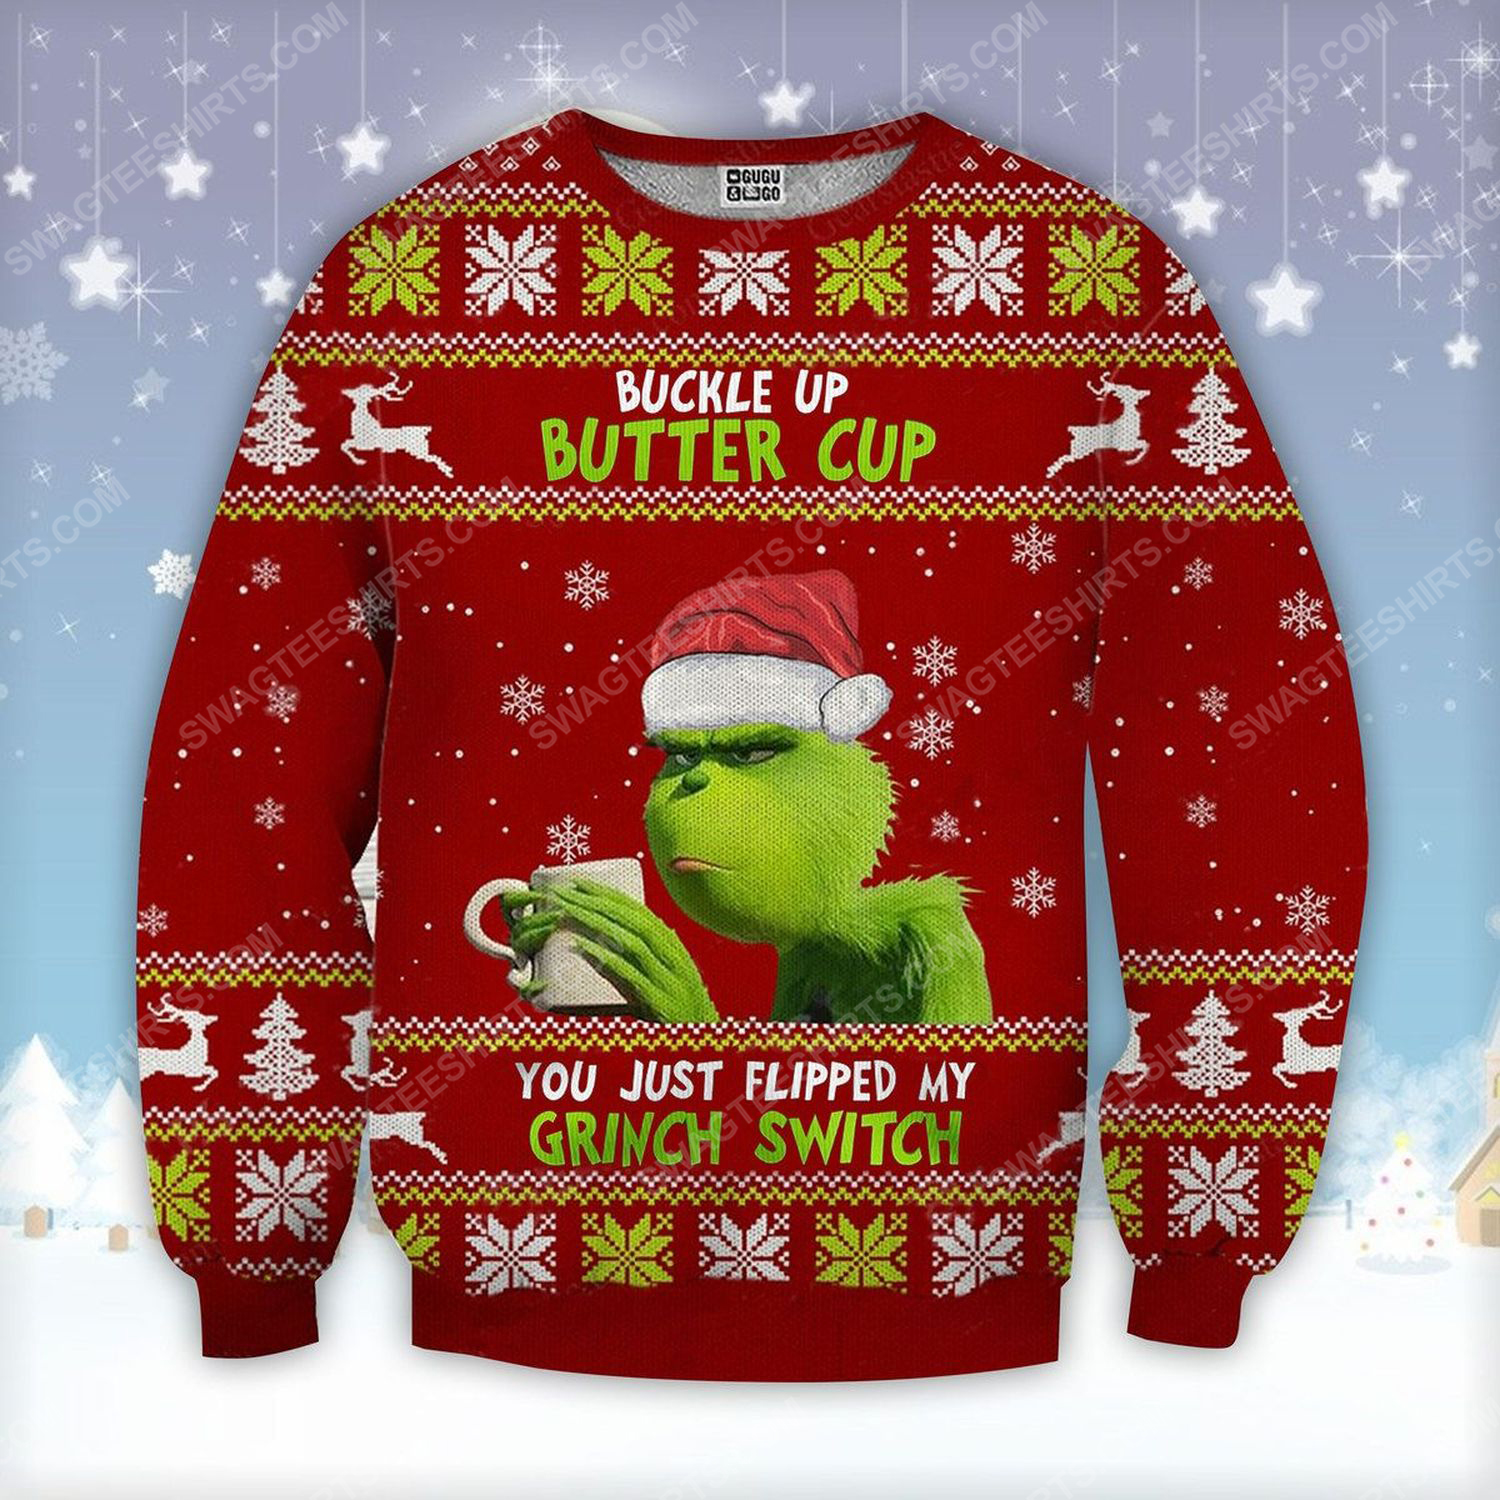 Buckle up buttercup you just flipped my grinch switch ugly christmas sweater - Copy (2)